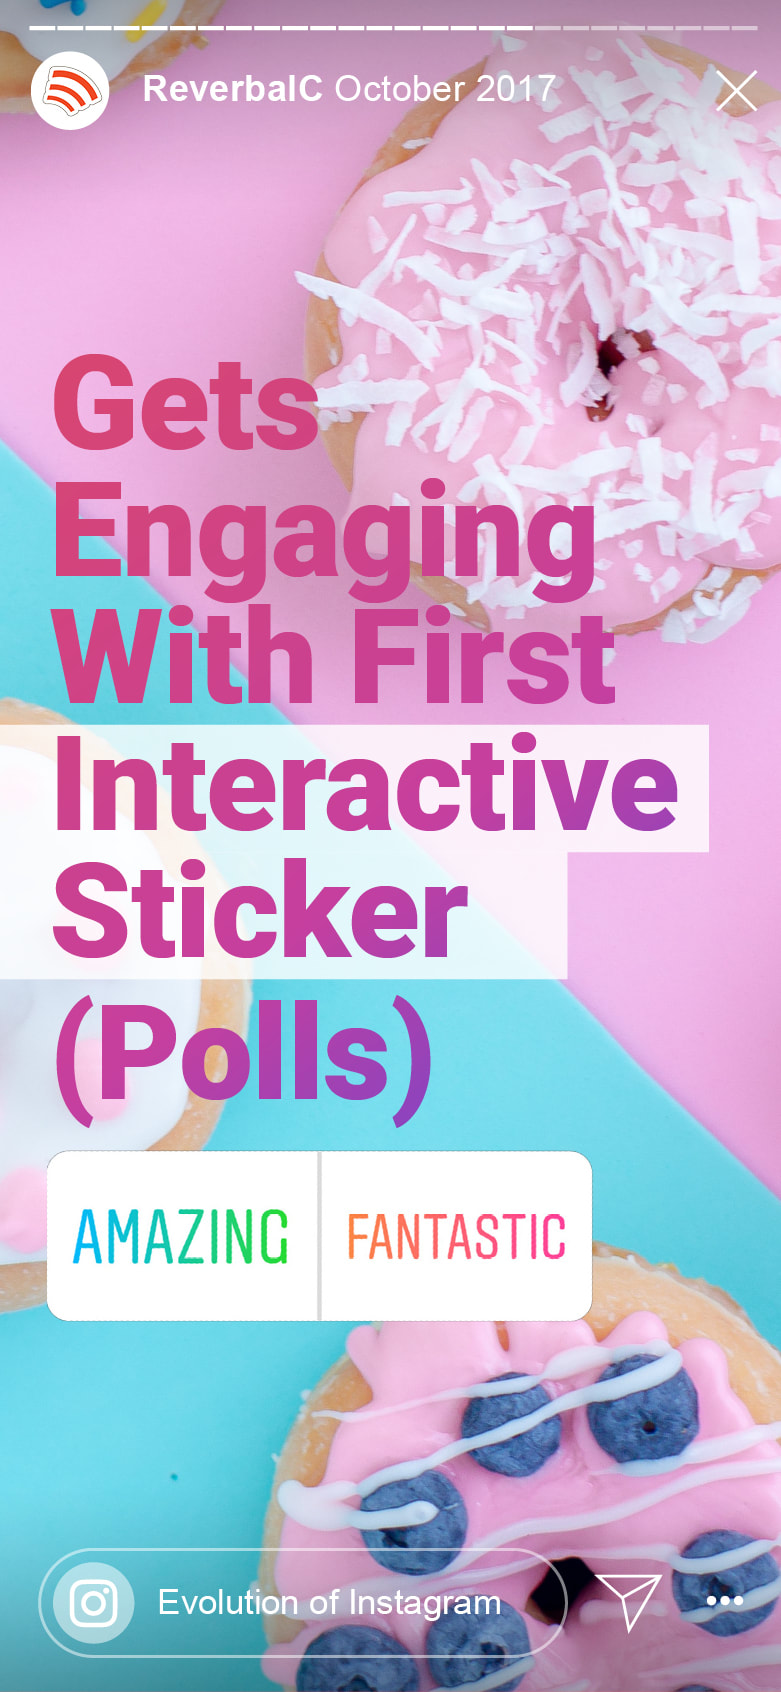 When did Instagram first roll out interactive stickers - poll stickers?